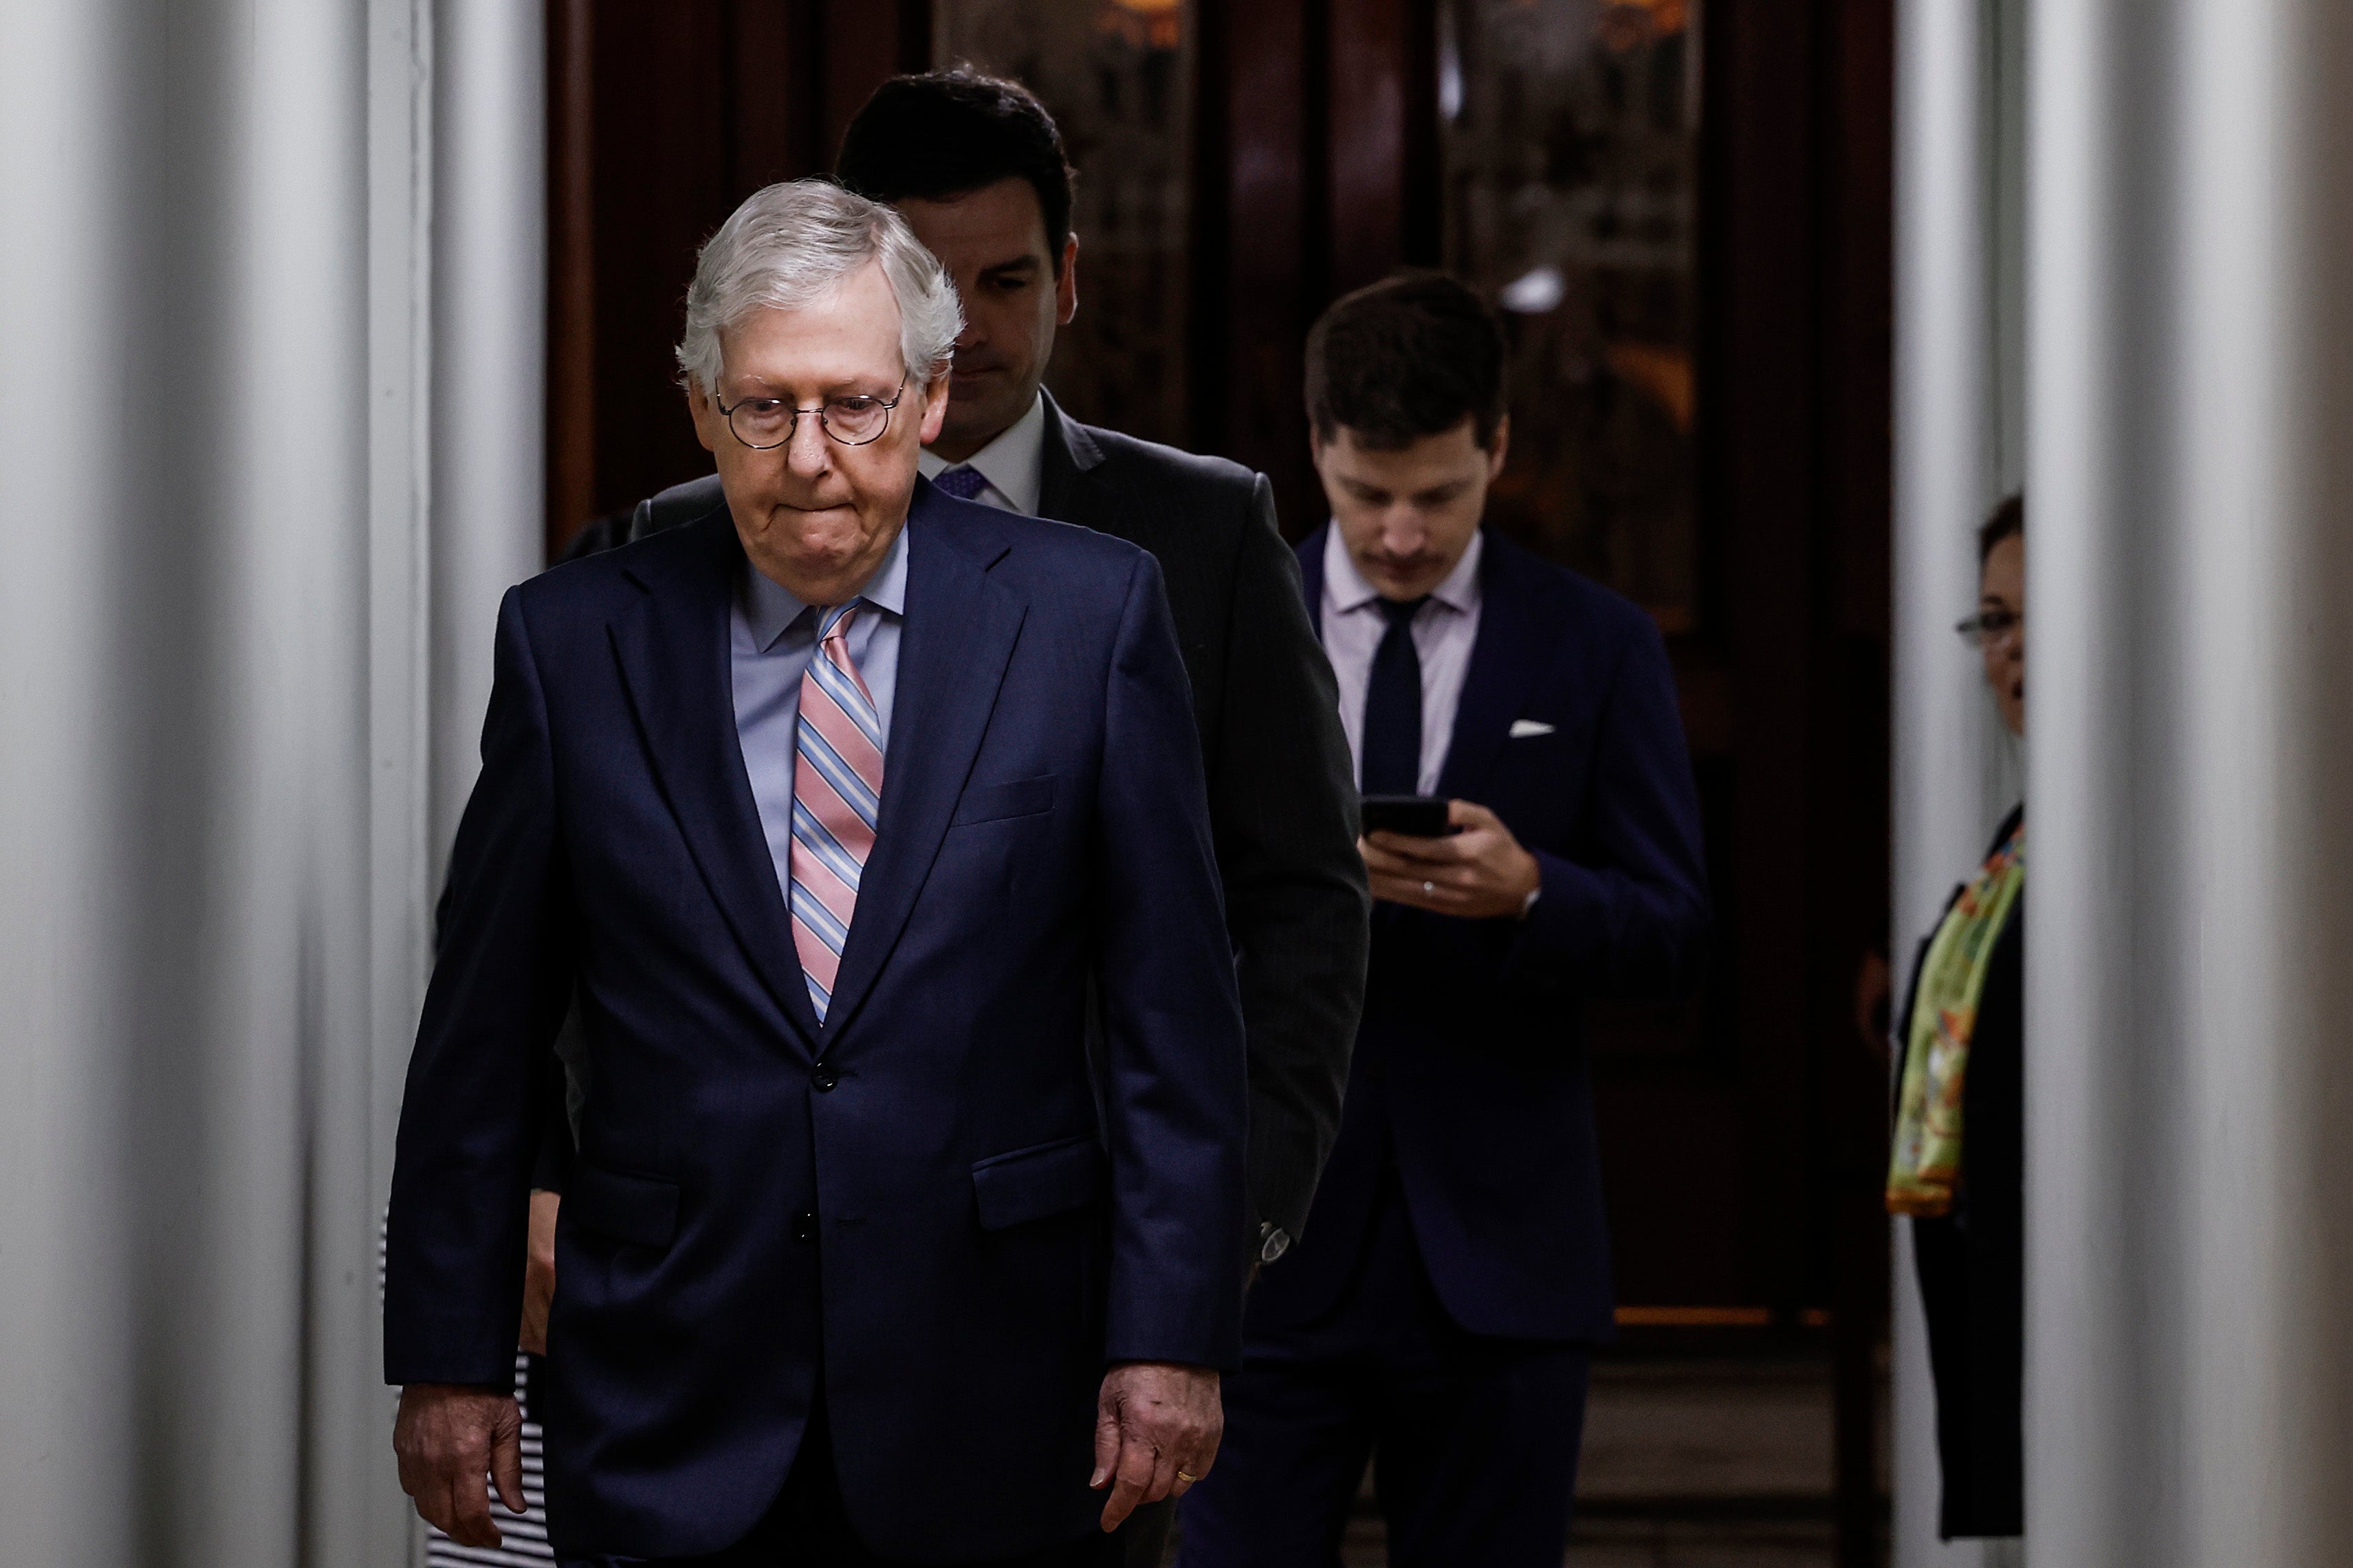 The highest-ranking Republican in the Senate, Mitch McConnell